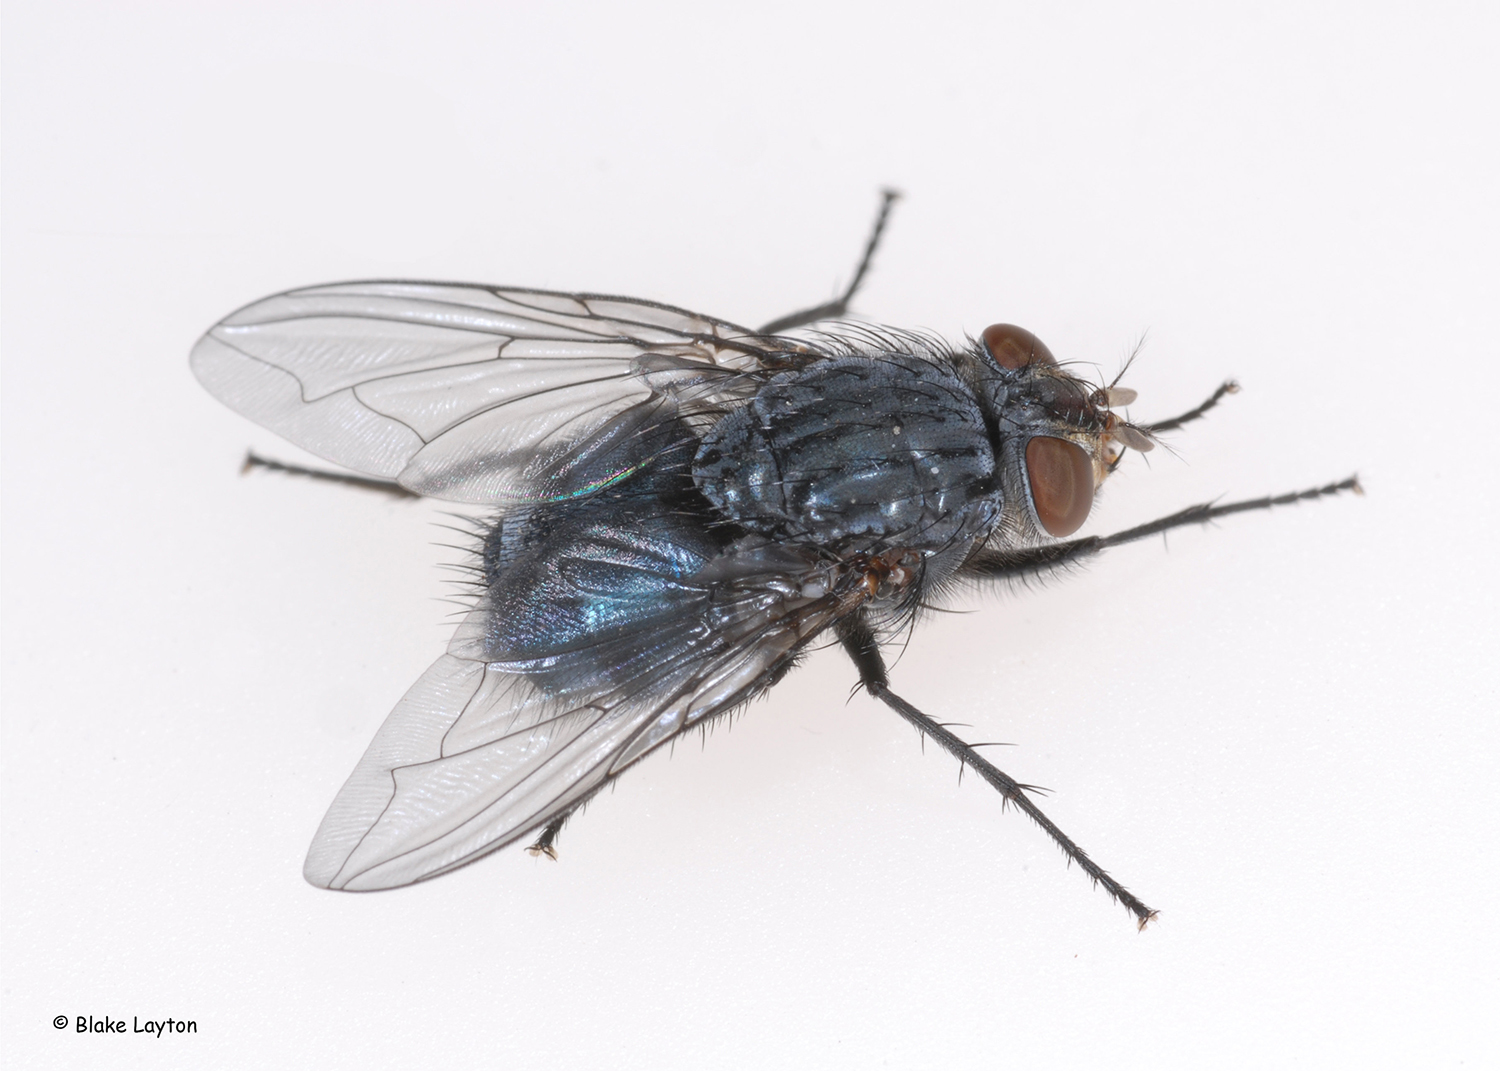 A fly with a shimmery blue color.